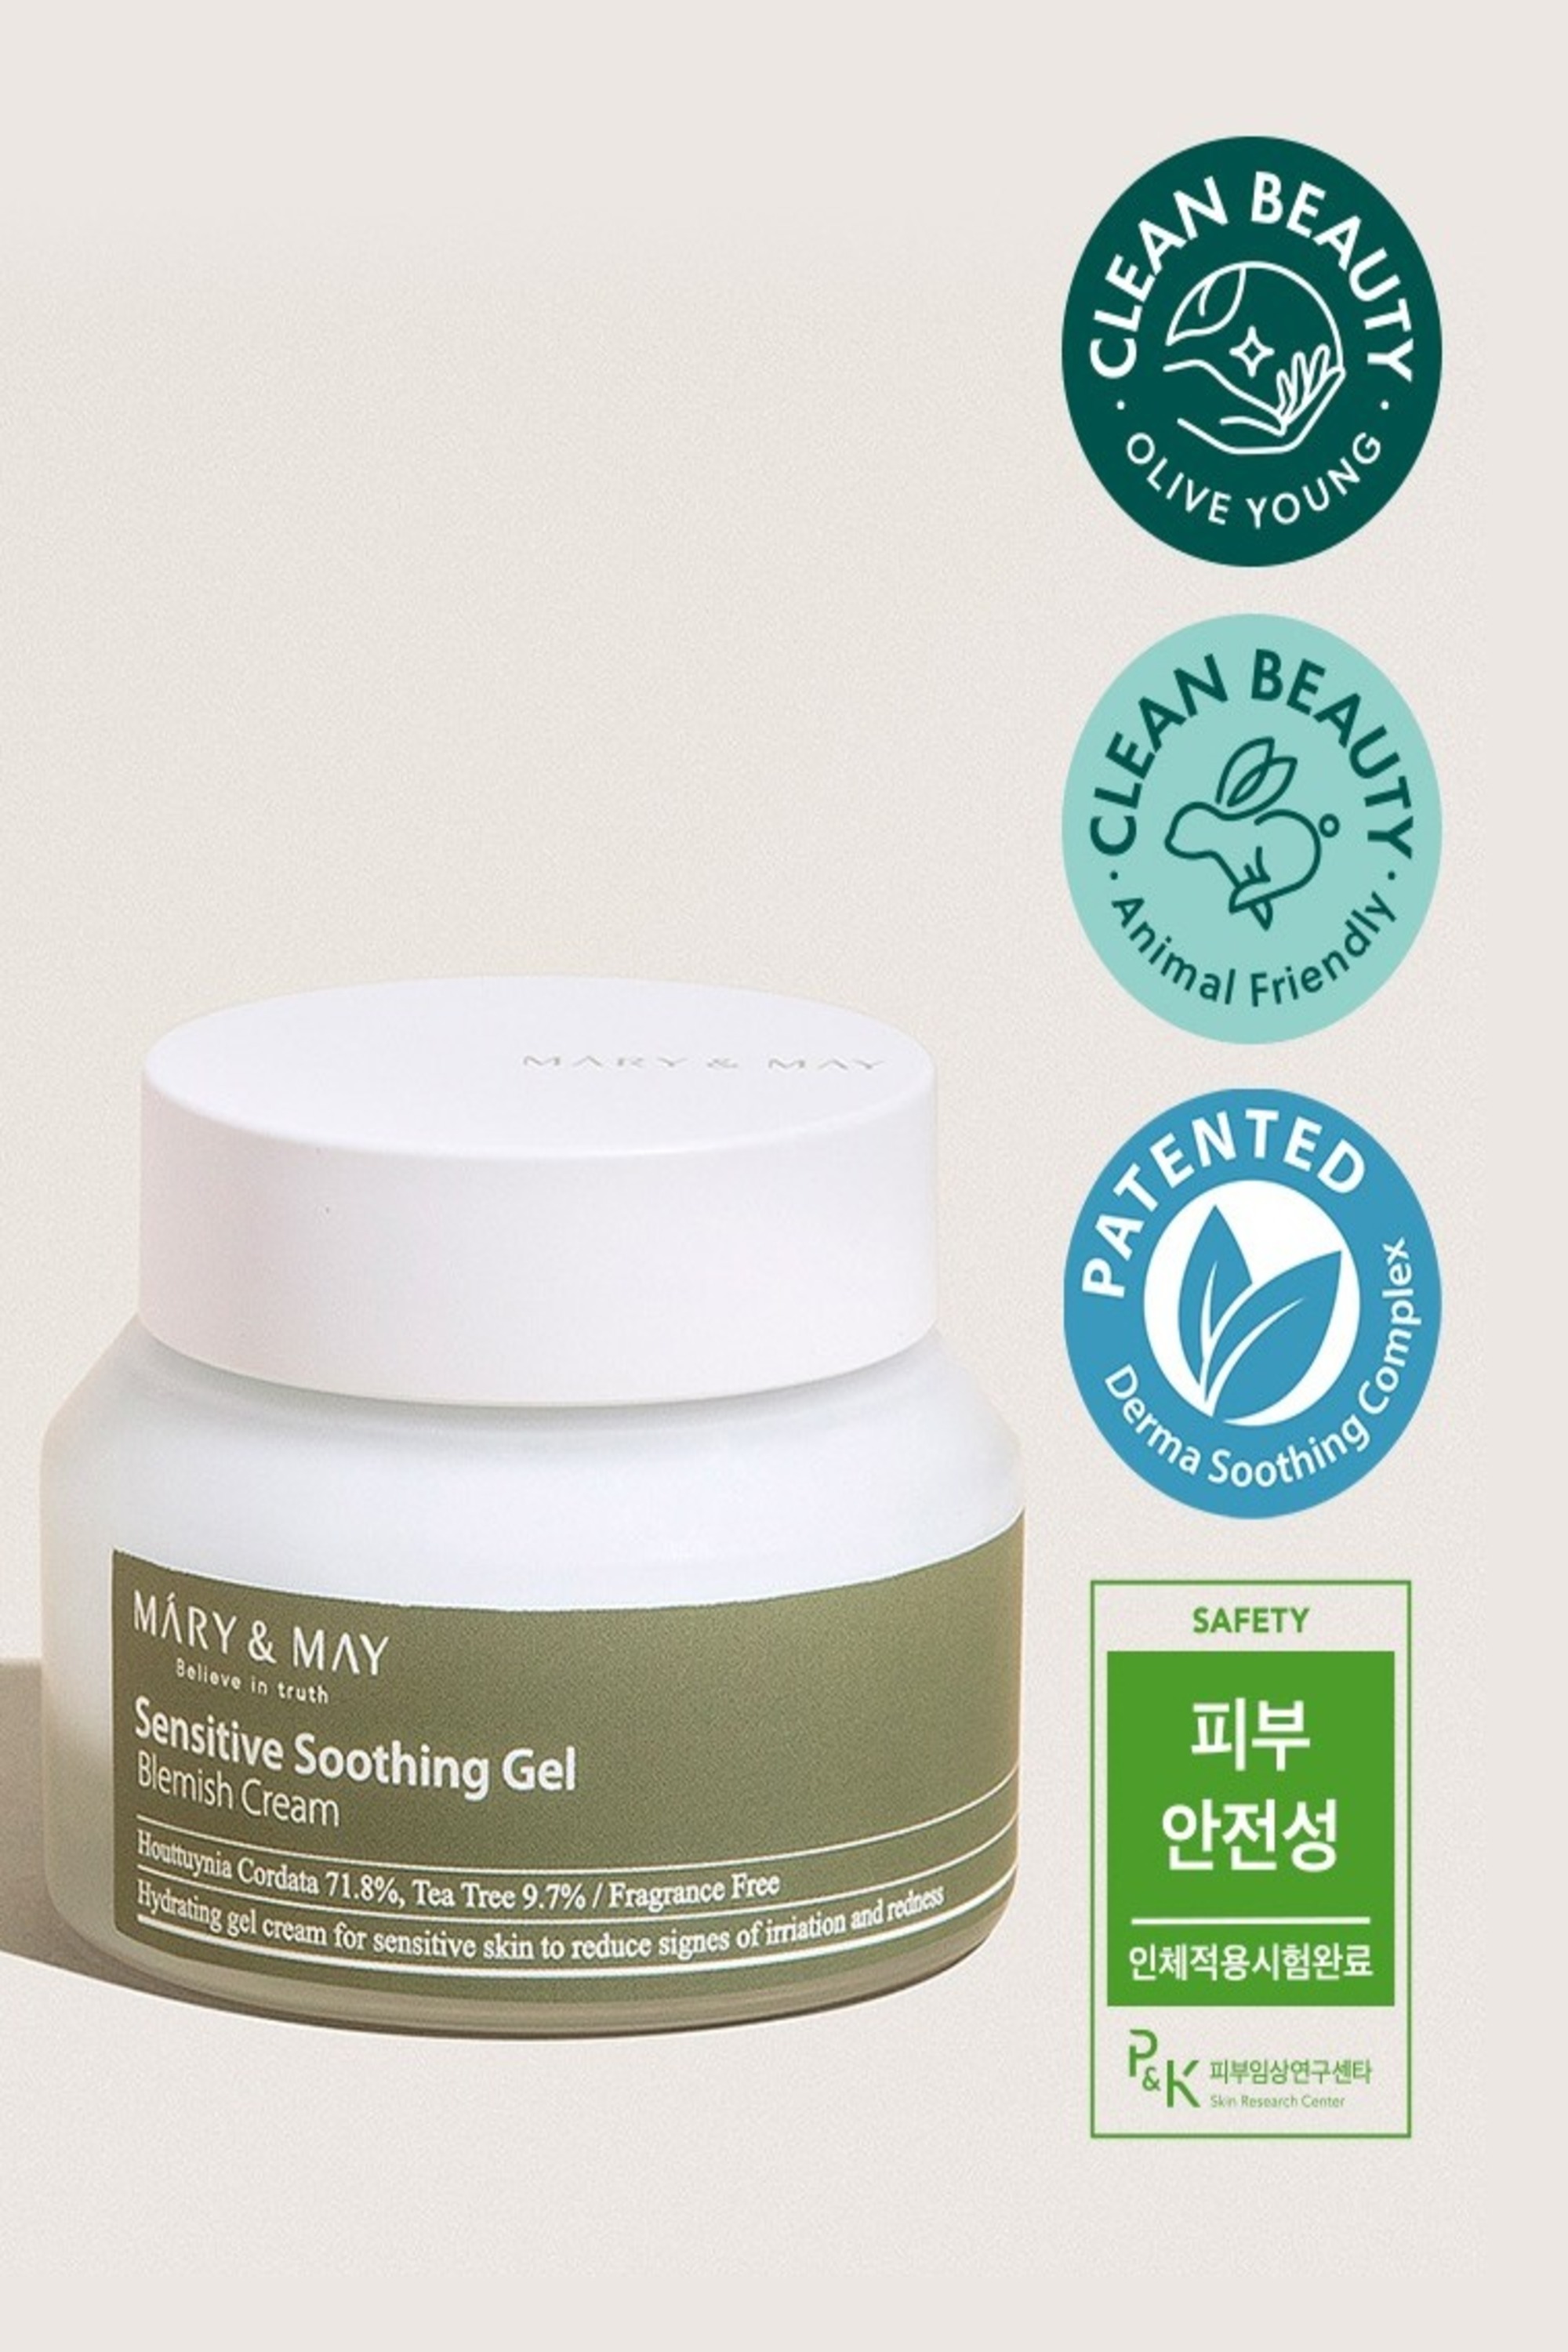  Mary&May Sensitive Soothing Gel Blemish Cream 70g 